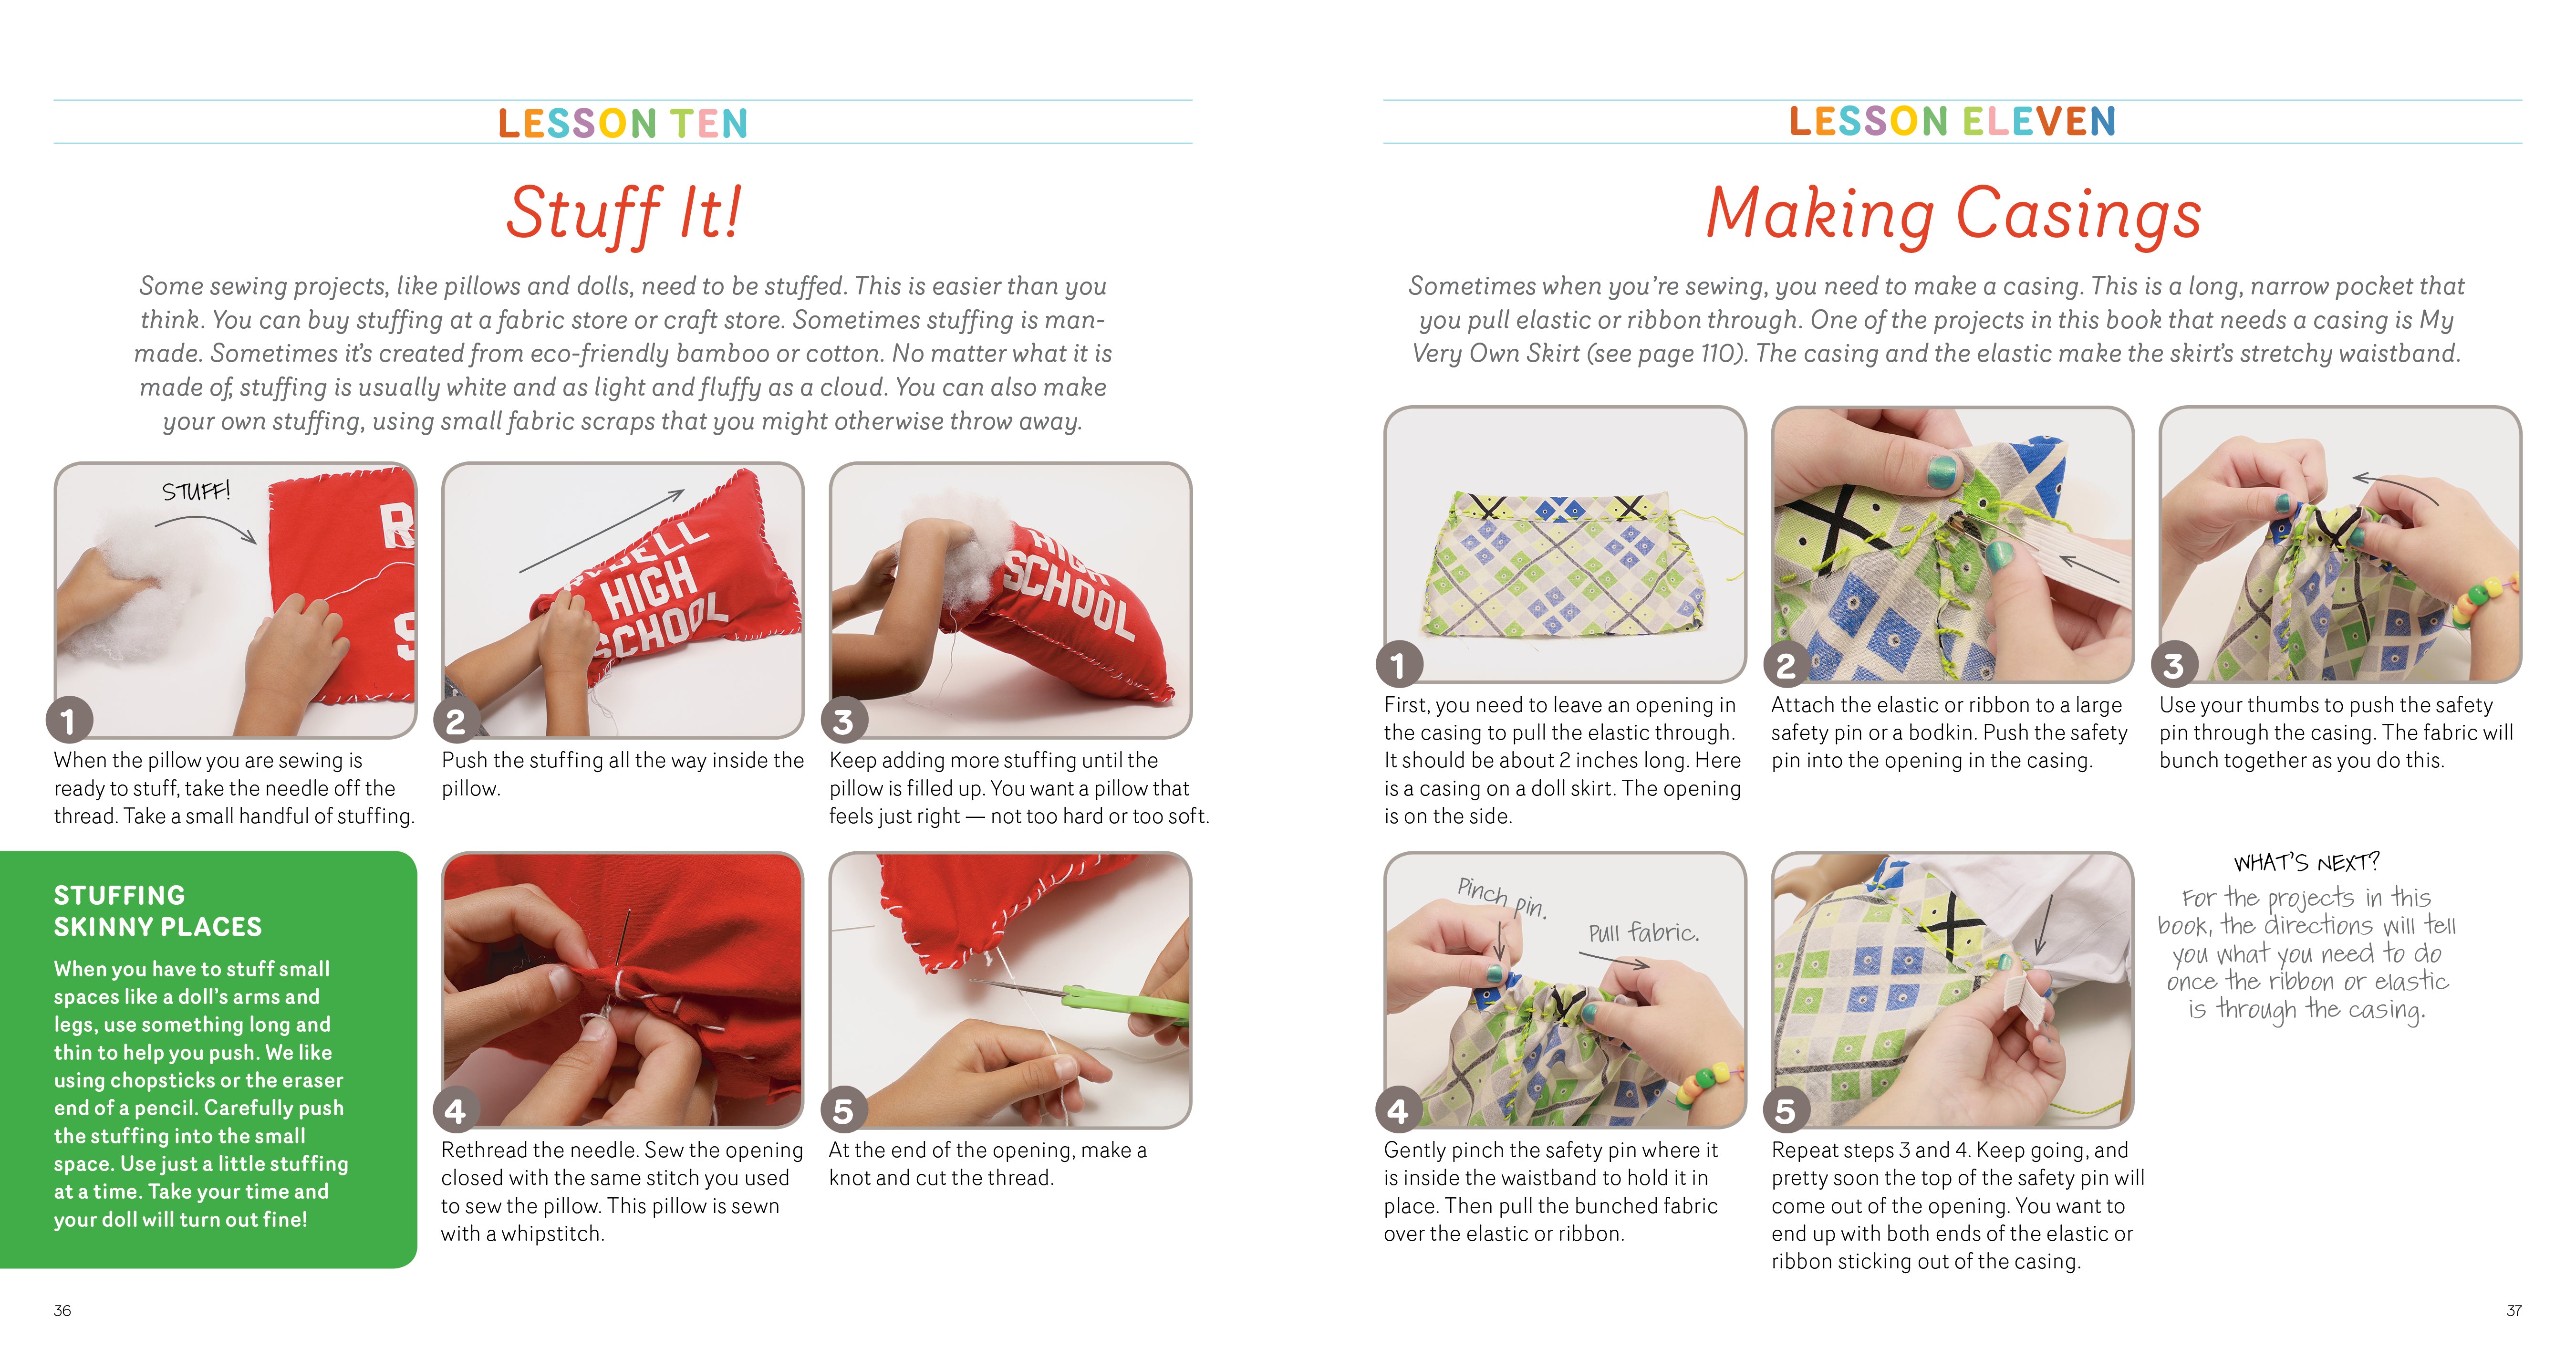 Sewing School - 21 Sewing Projects Kids Will Love to Make    